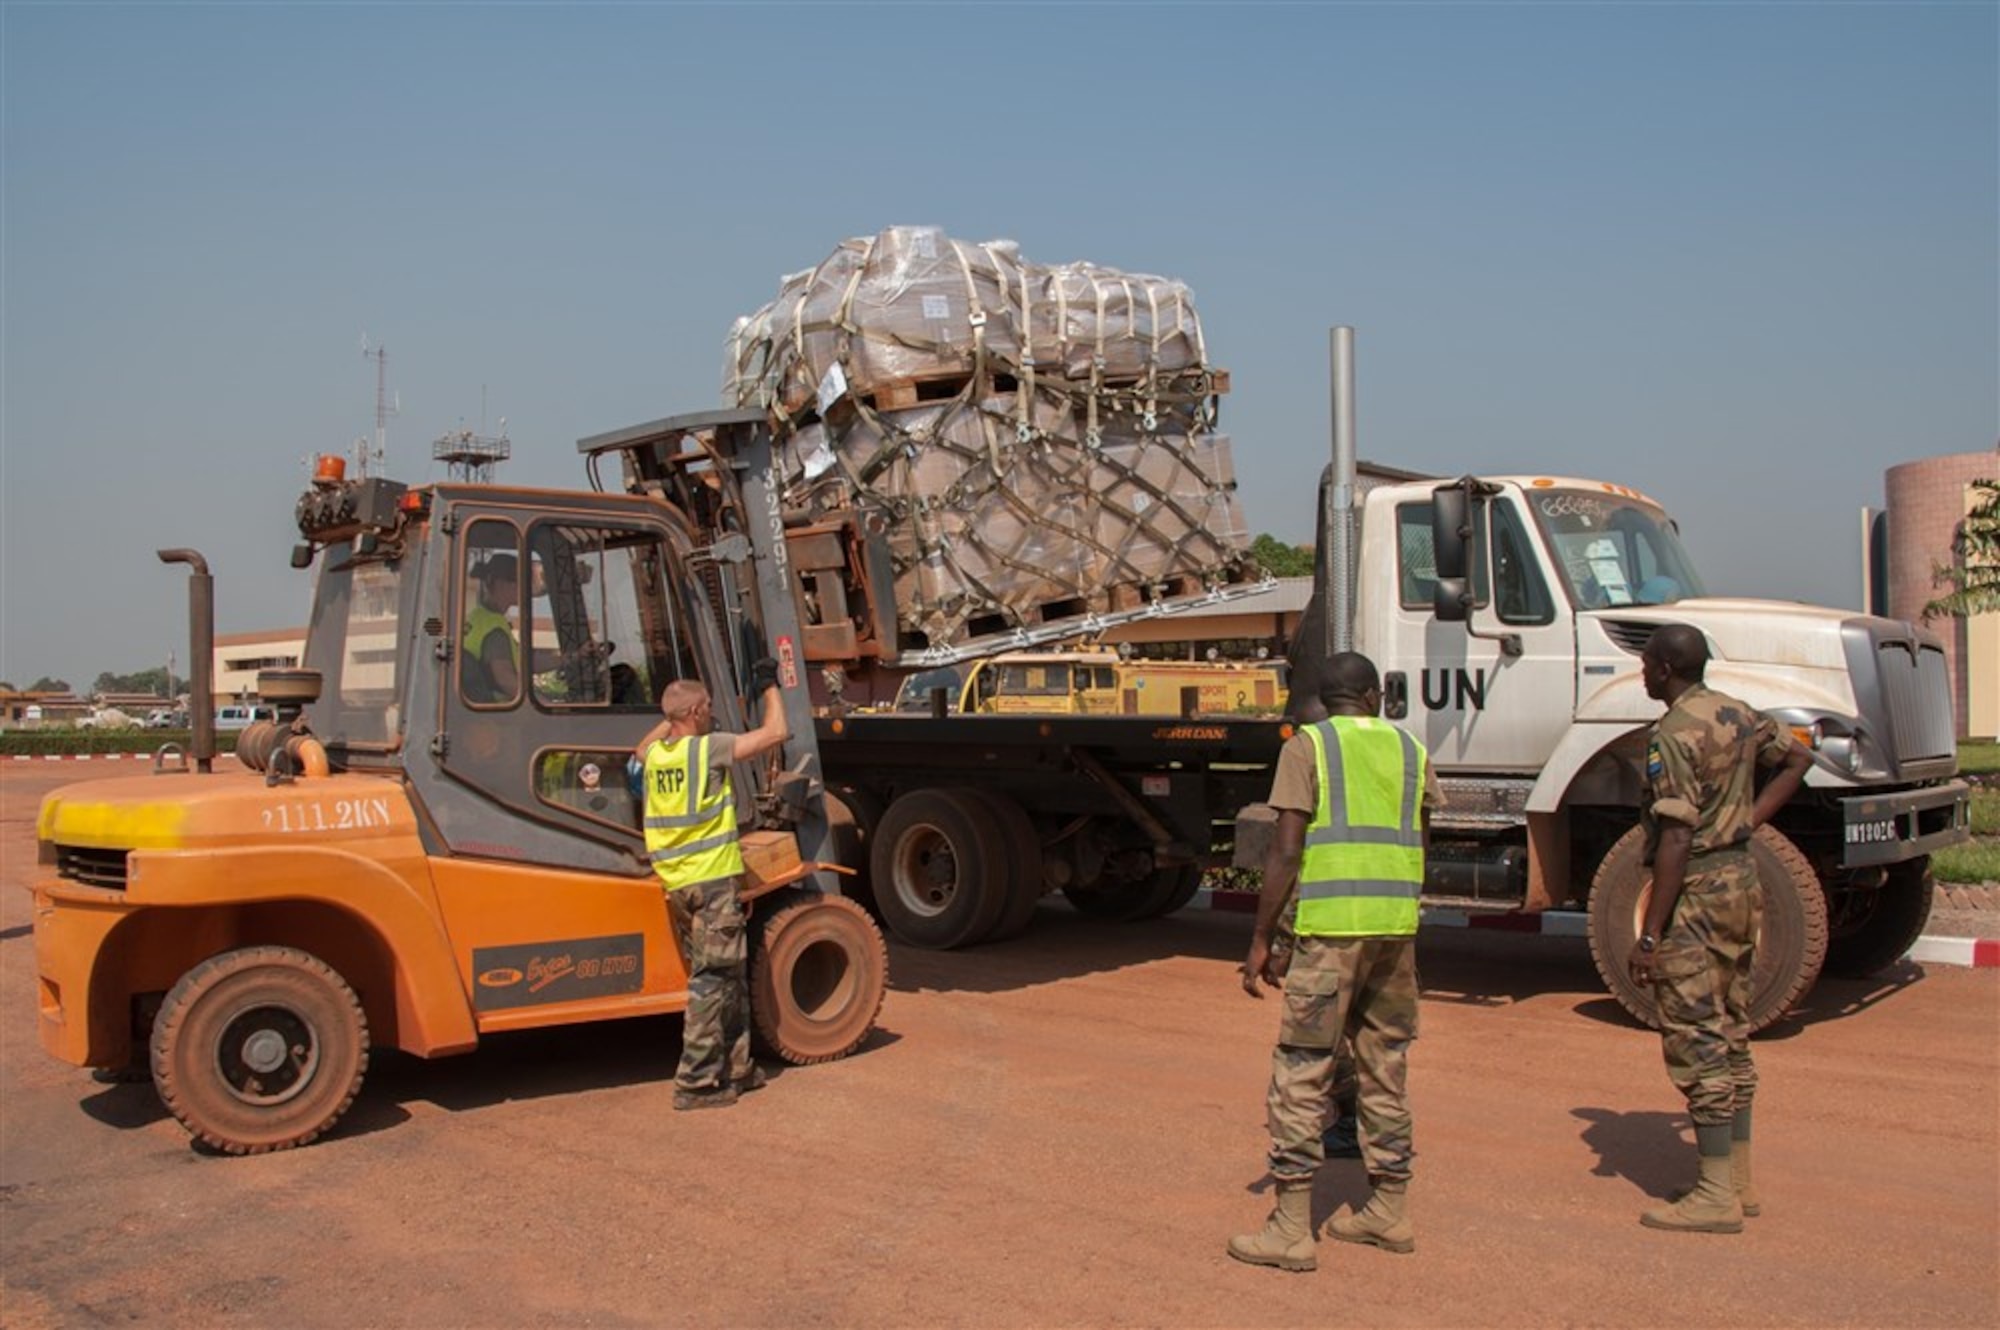 Airmen from the 621st Contingency Response Wing work alongside French and Gabonese forces to load cargo bound for Bangui, Central African Republic, Dec. 15, 2015. The result was the timely deployment of more than 450,000 pounds of vital equipment and vehicles to assist the Gabonese military's mission supporting the United Nations Multidimensional Integrated Stabilization Mission in the Central African Republic, or MINUSCA. (Photo courtesy of French military, ADC Laminette)